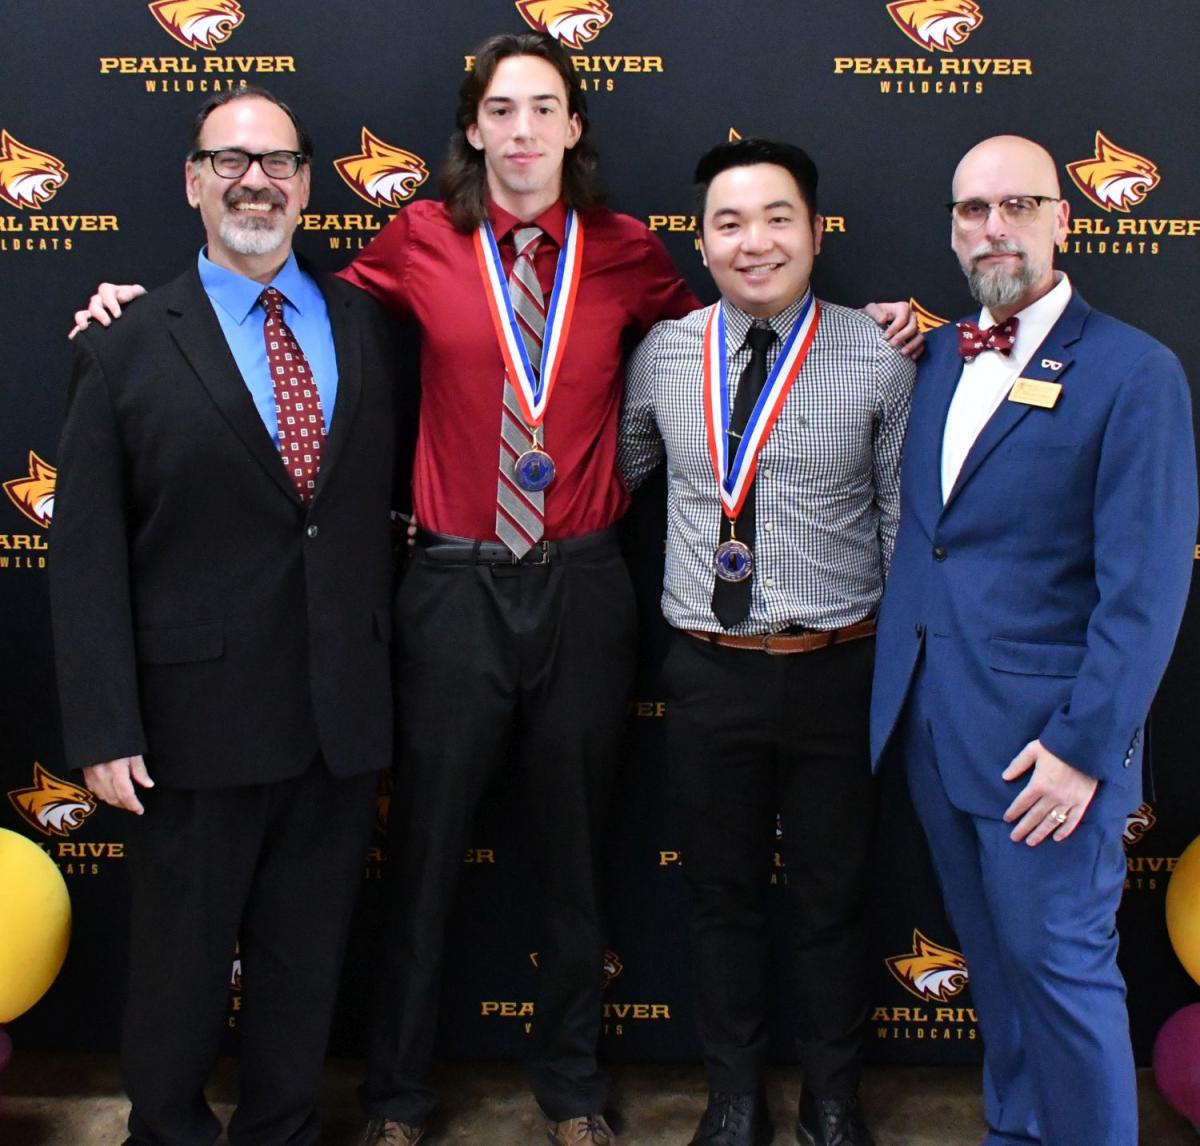 PRCC students Shui Lin of Fuzhou, Fujian Province, China and Patrick Dunkle of Petal were recognized as members of the All-Mississippi Academic Team. They are pictured with Dr. Doug Donohue (right) and Dr. James Collum, Phi Theta Kappa advisors.